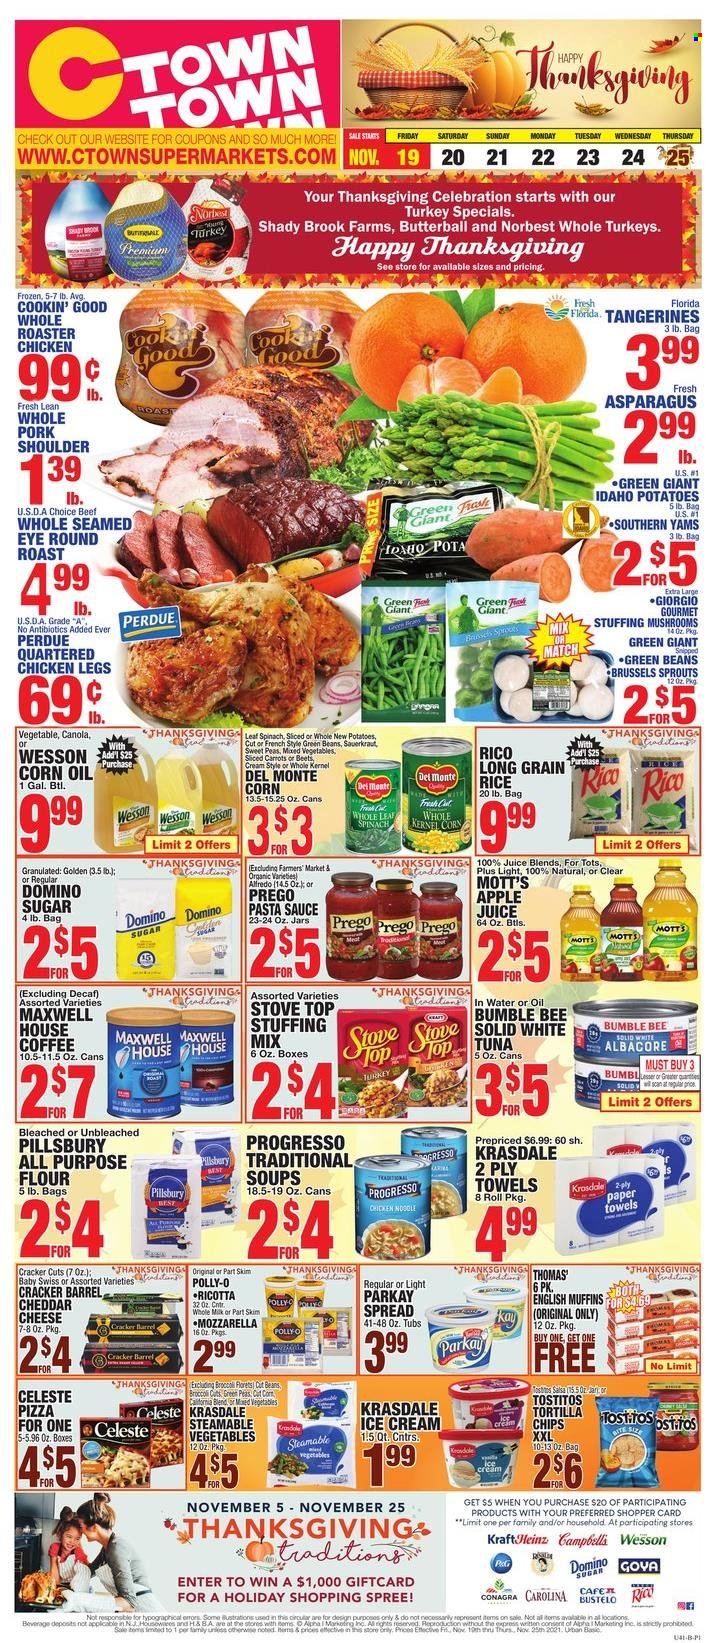 thumbnail - C-Town Flyer - 11/19/2021 - 11/25/2021 - Sales products - english muffins, asparagus, carrots, corn, green beans, potatoes, brussel sprouts, Mott's, tuna, pizza, pasta sauce, Bumble Bee, sauce, Pillsbury, Progresso, Perdue®, Kraft®, Butterball, ricotta, ice cream, mixed vegetables, Celeste, Celebration, crackers, tortilla chips, chips, Tostitos, all purpose flour, stuffing mix, sugar, sauerkraut, rice, long grain rice, salsa, juice, Maxwell House, tangerines. Page 1.